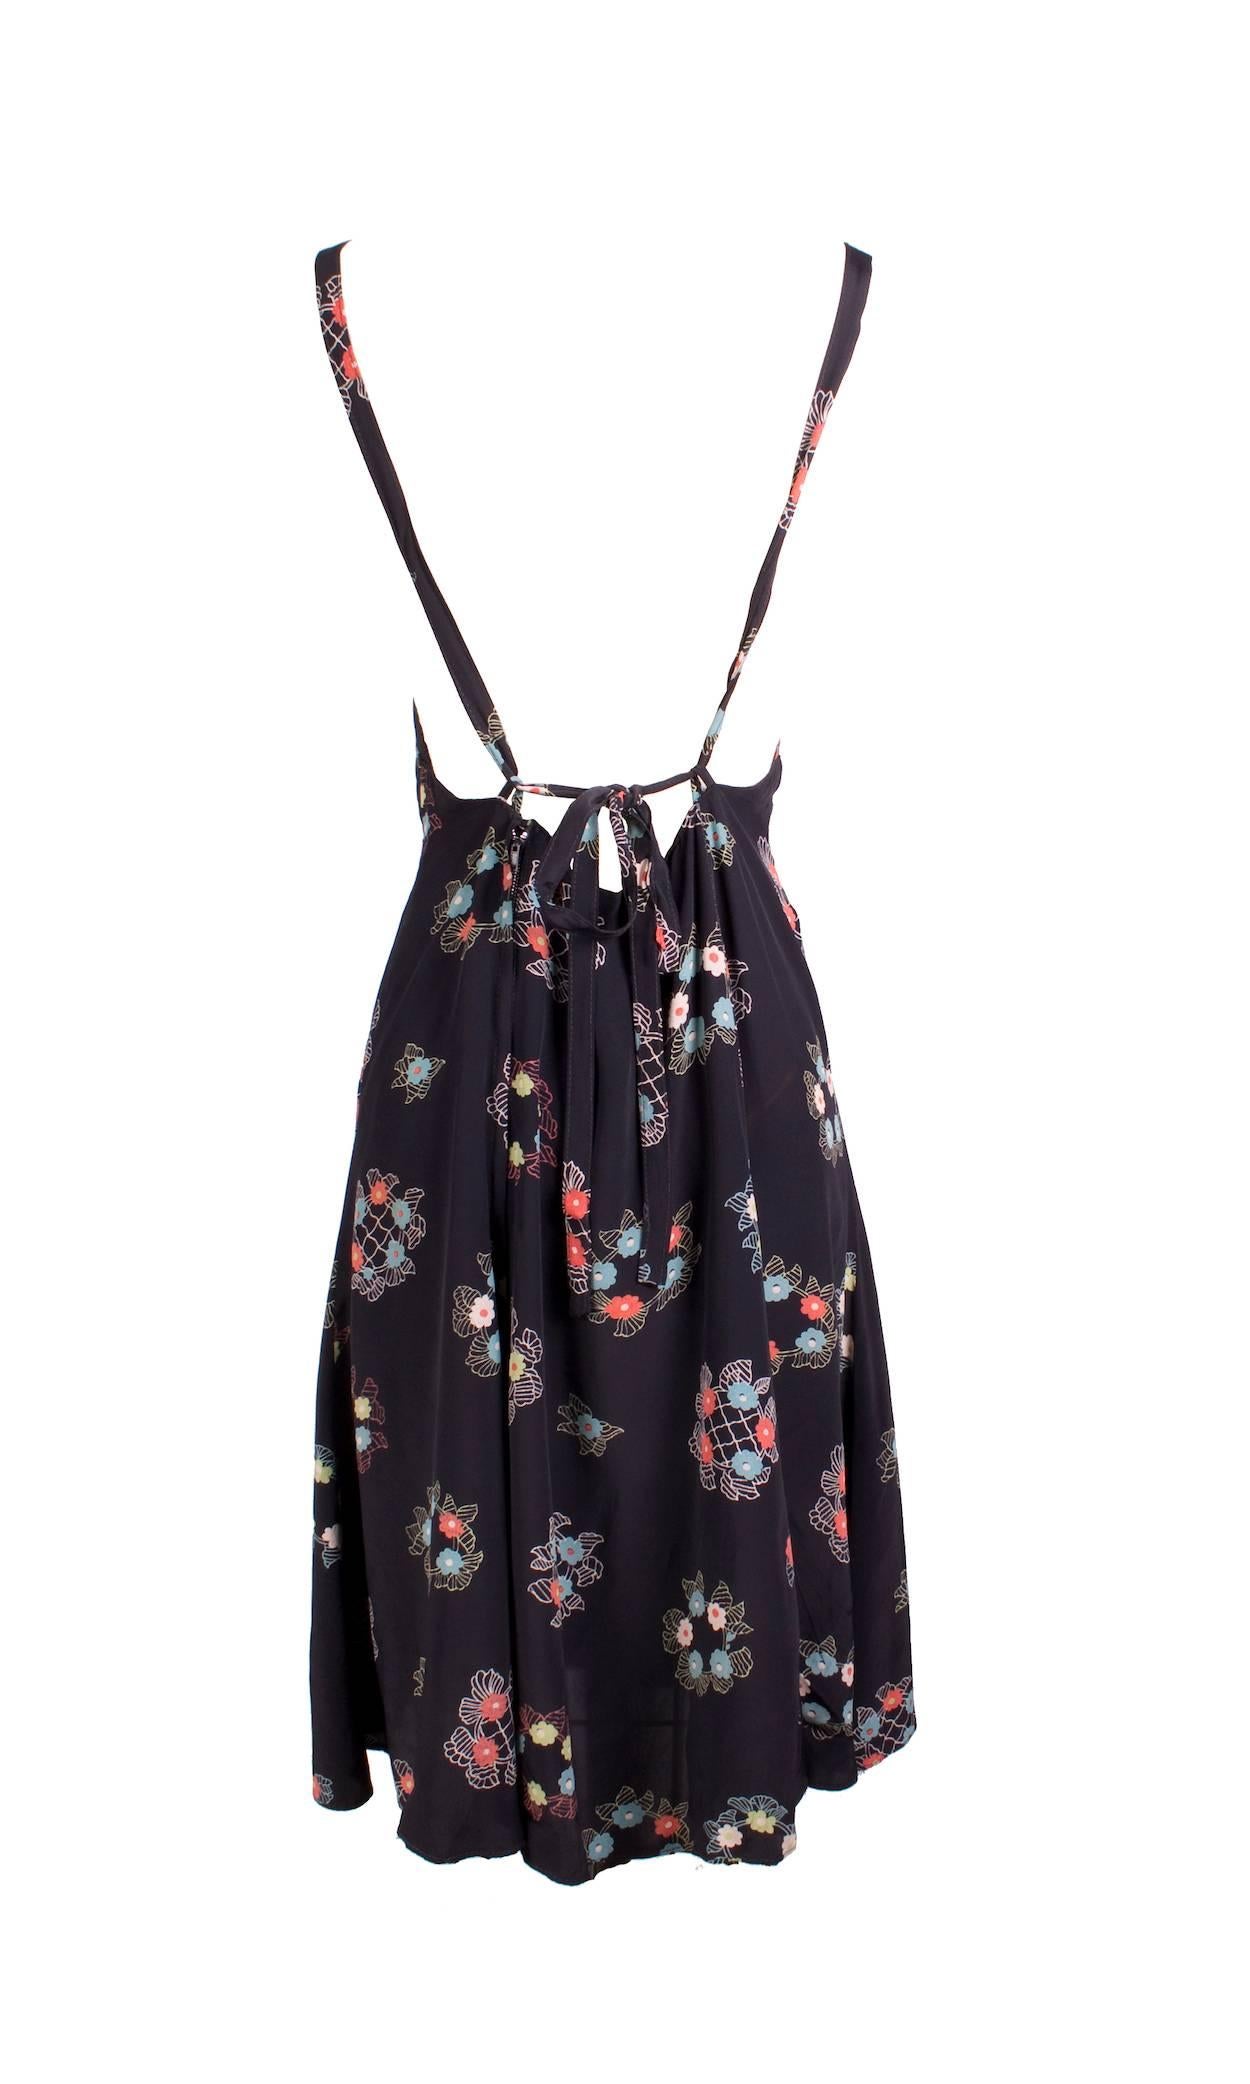 This is a silk chiffon dress by Ossie Clark c. 1970s.  It features a floral print by Celia Birtwell. Details include halter straps and a cinching back tie. There is also a hidden zipper down the center back.  